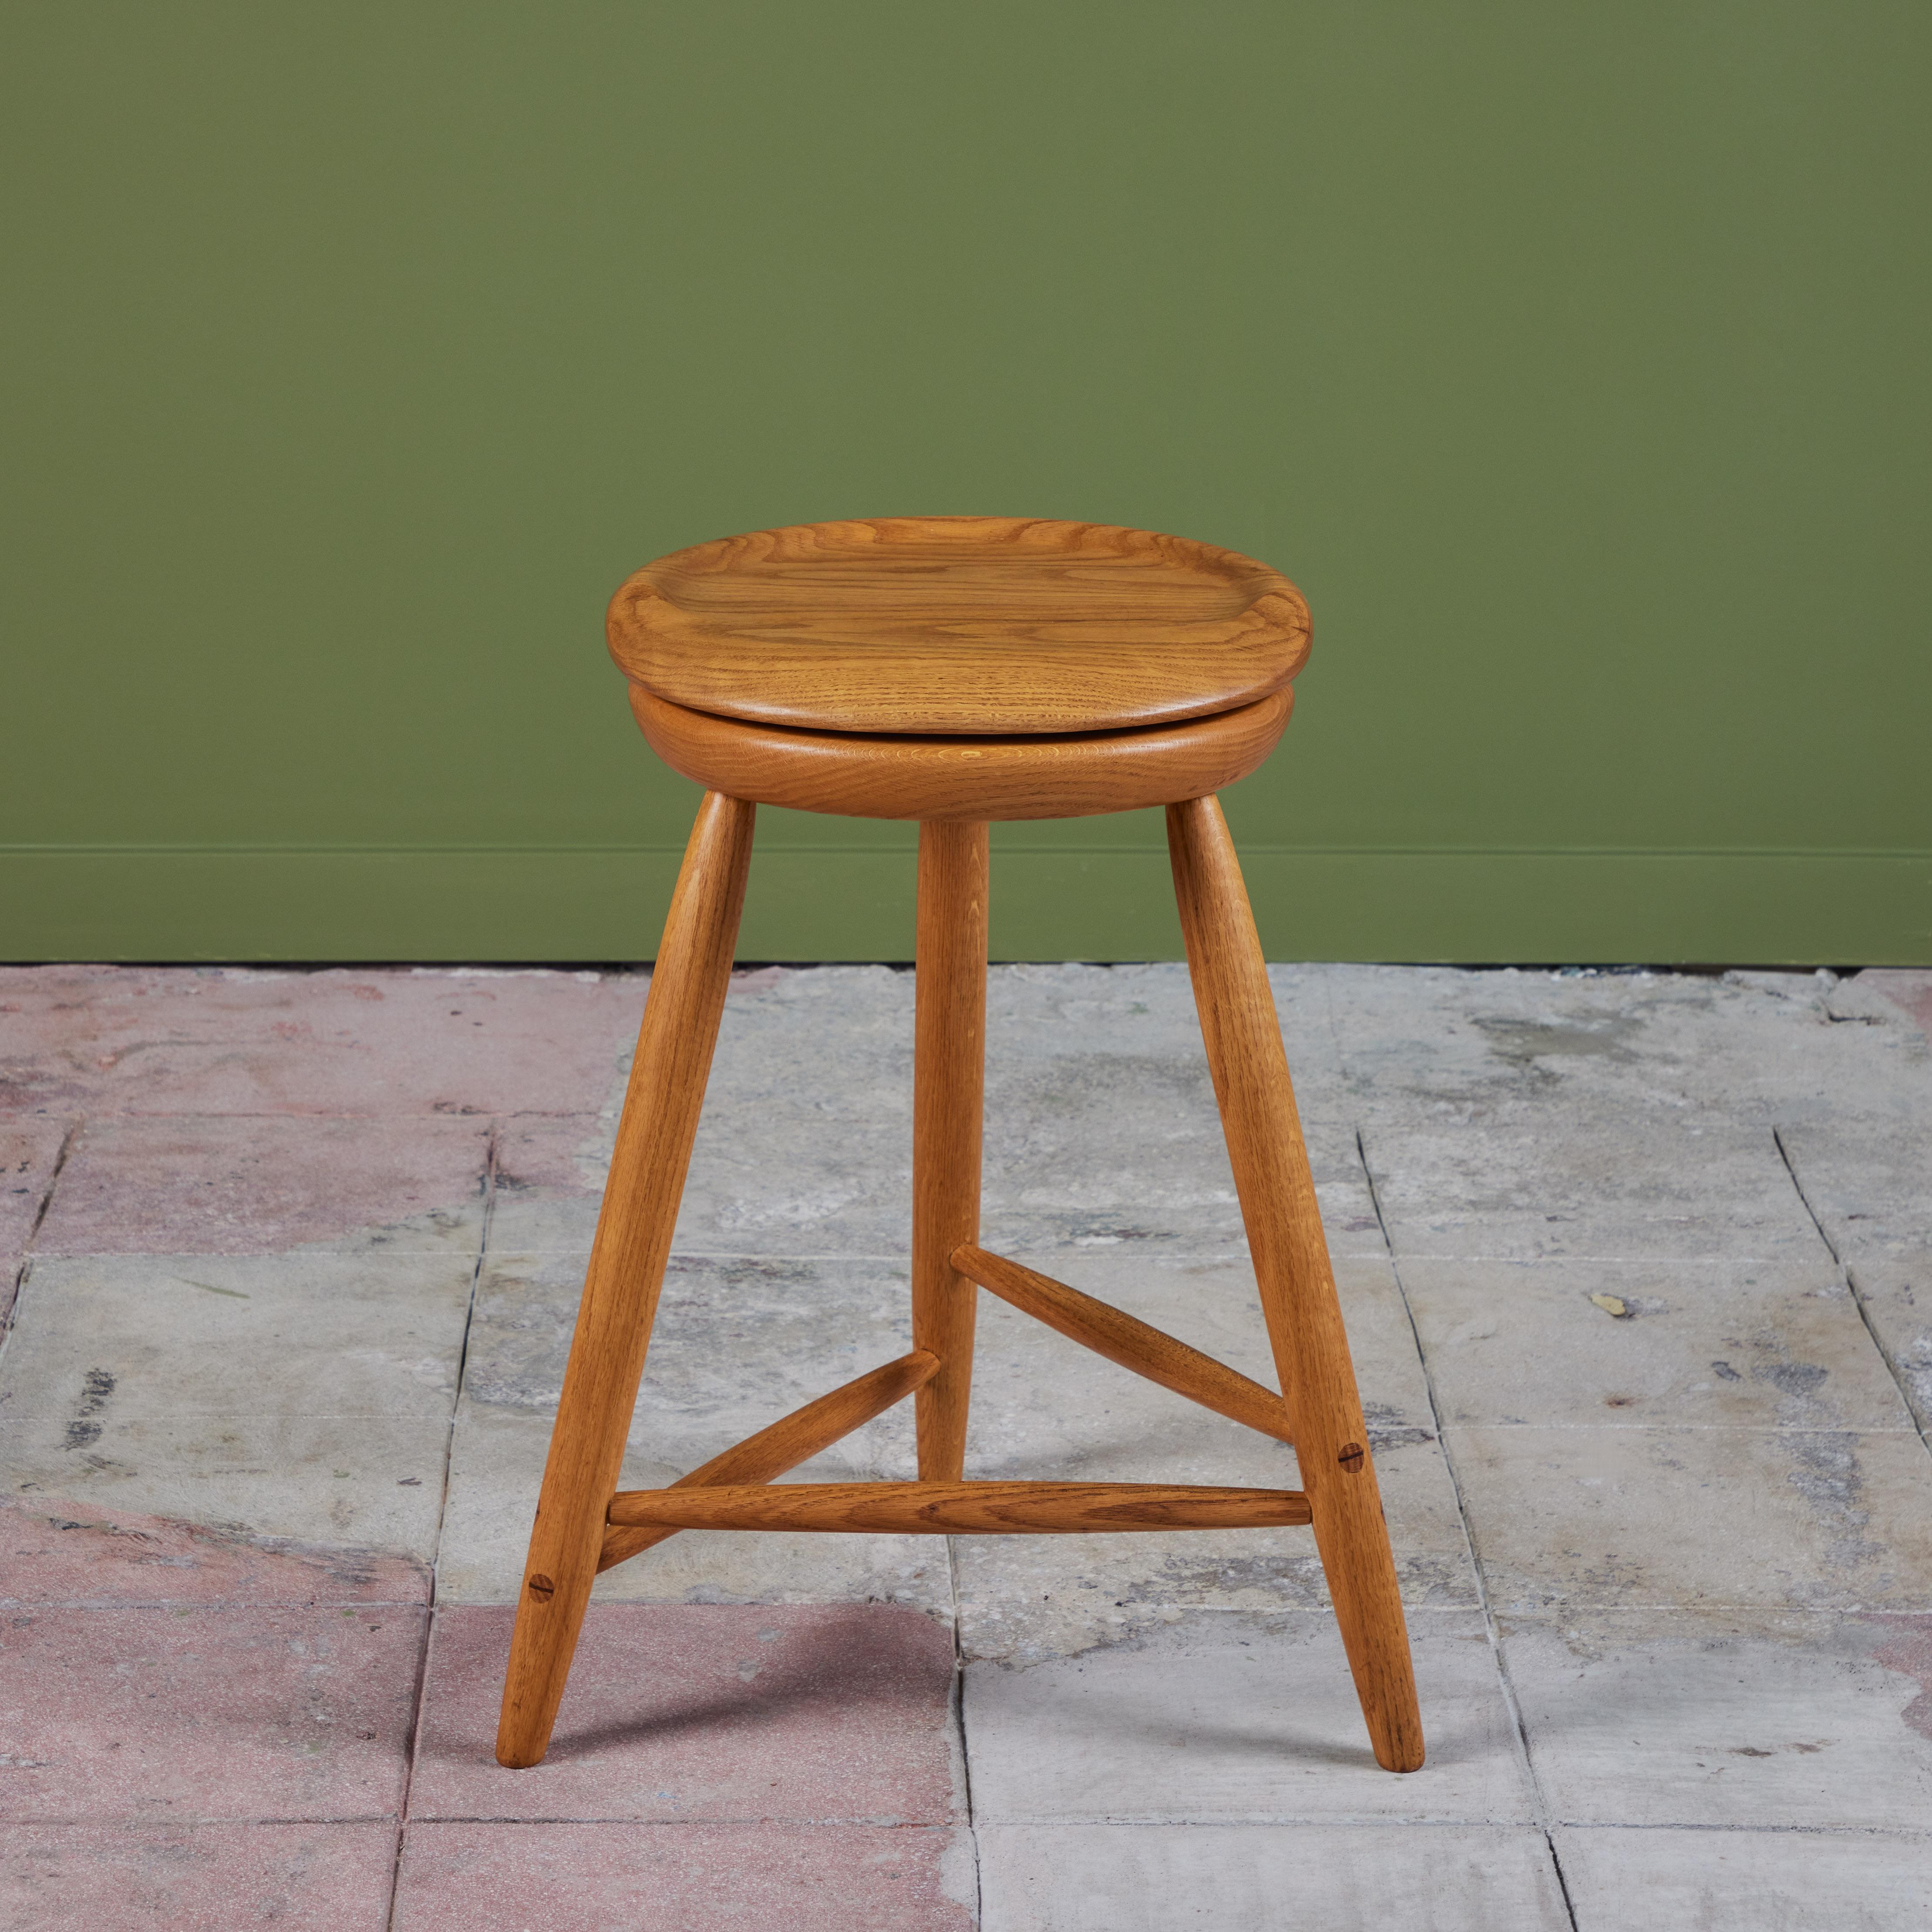 Studio craft stool made by Kai Pedersen c.1987s, USA. The oak stool showcases a minimalist design with a swivel seat and rounded edges. The stool is supported by three dowel legs with stretchers.
Signed Kai Pedersen - 1987.
2